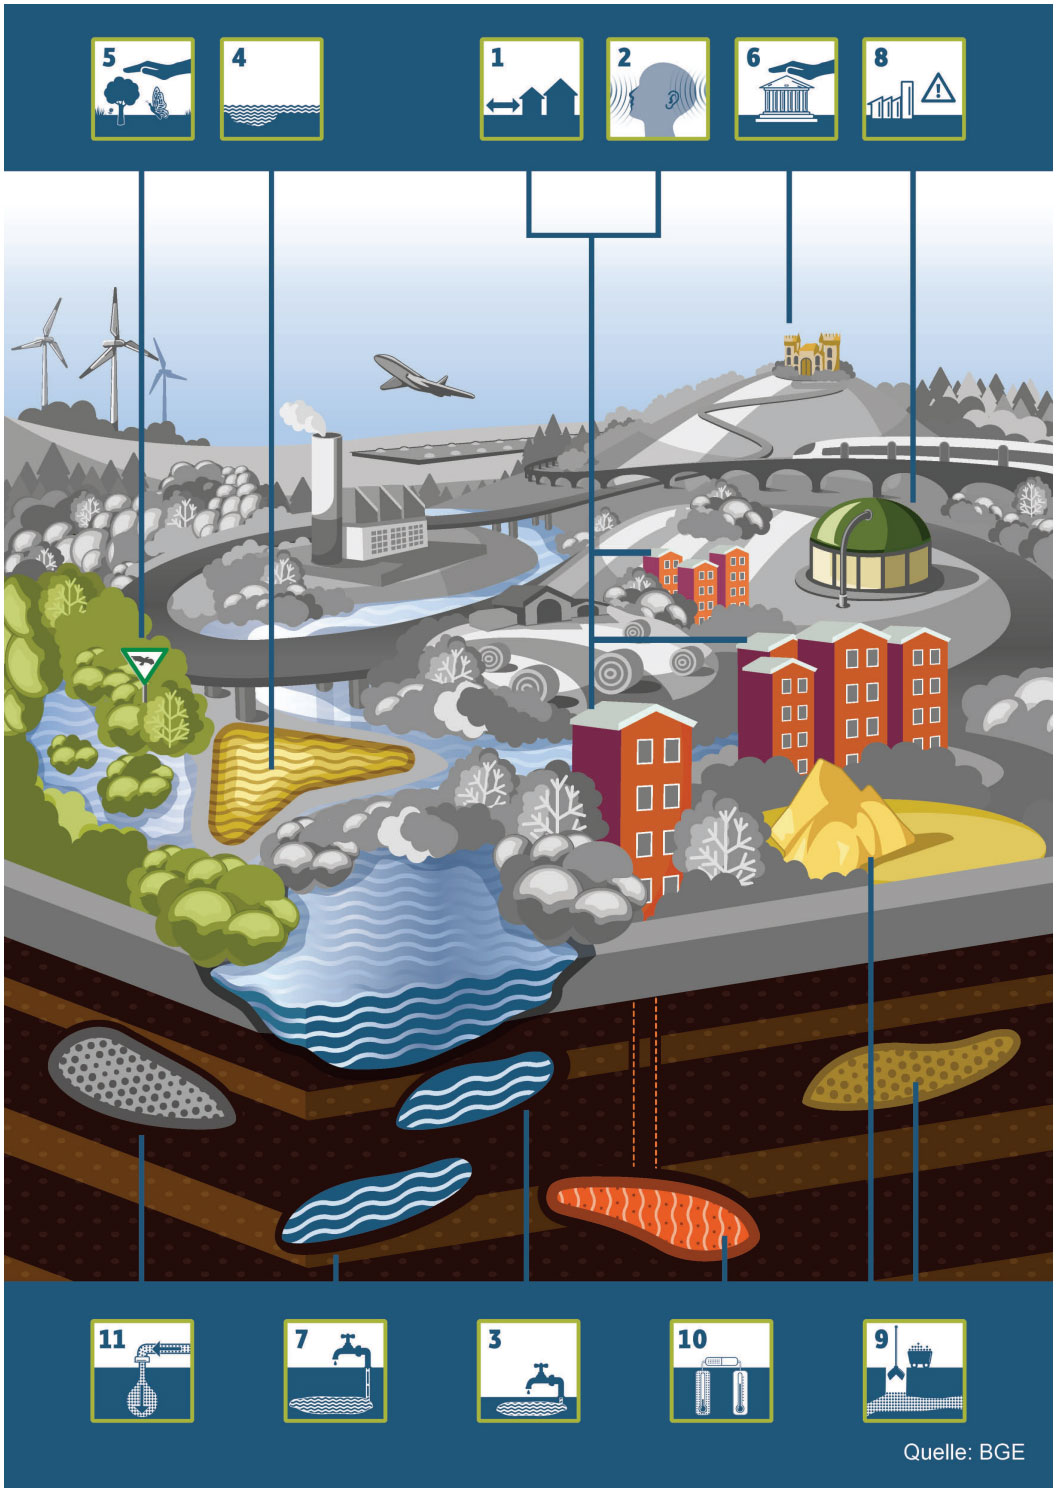 The infographic shows a stylized landscape with buildings, waterways and infrastructure and assigns the planning-scientific weighing criteria